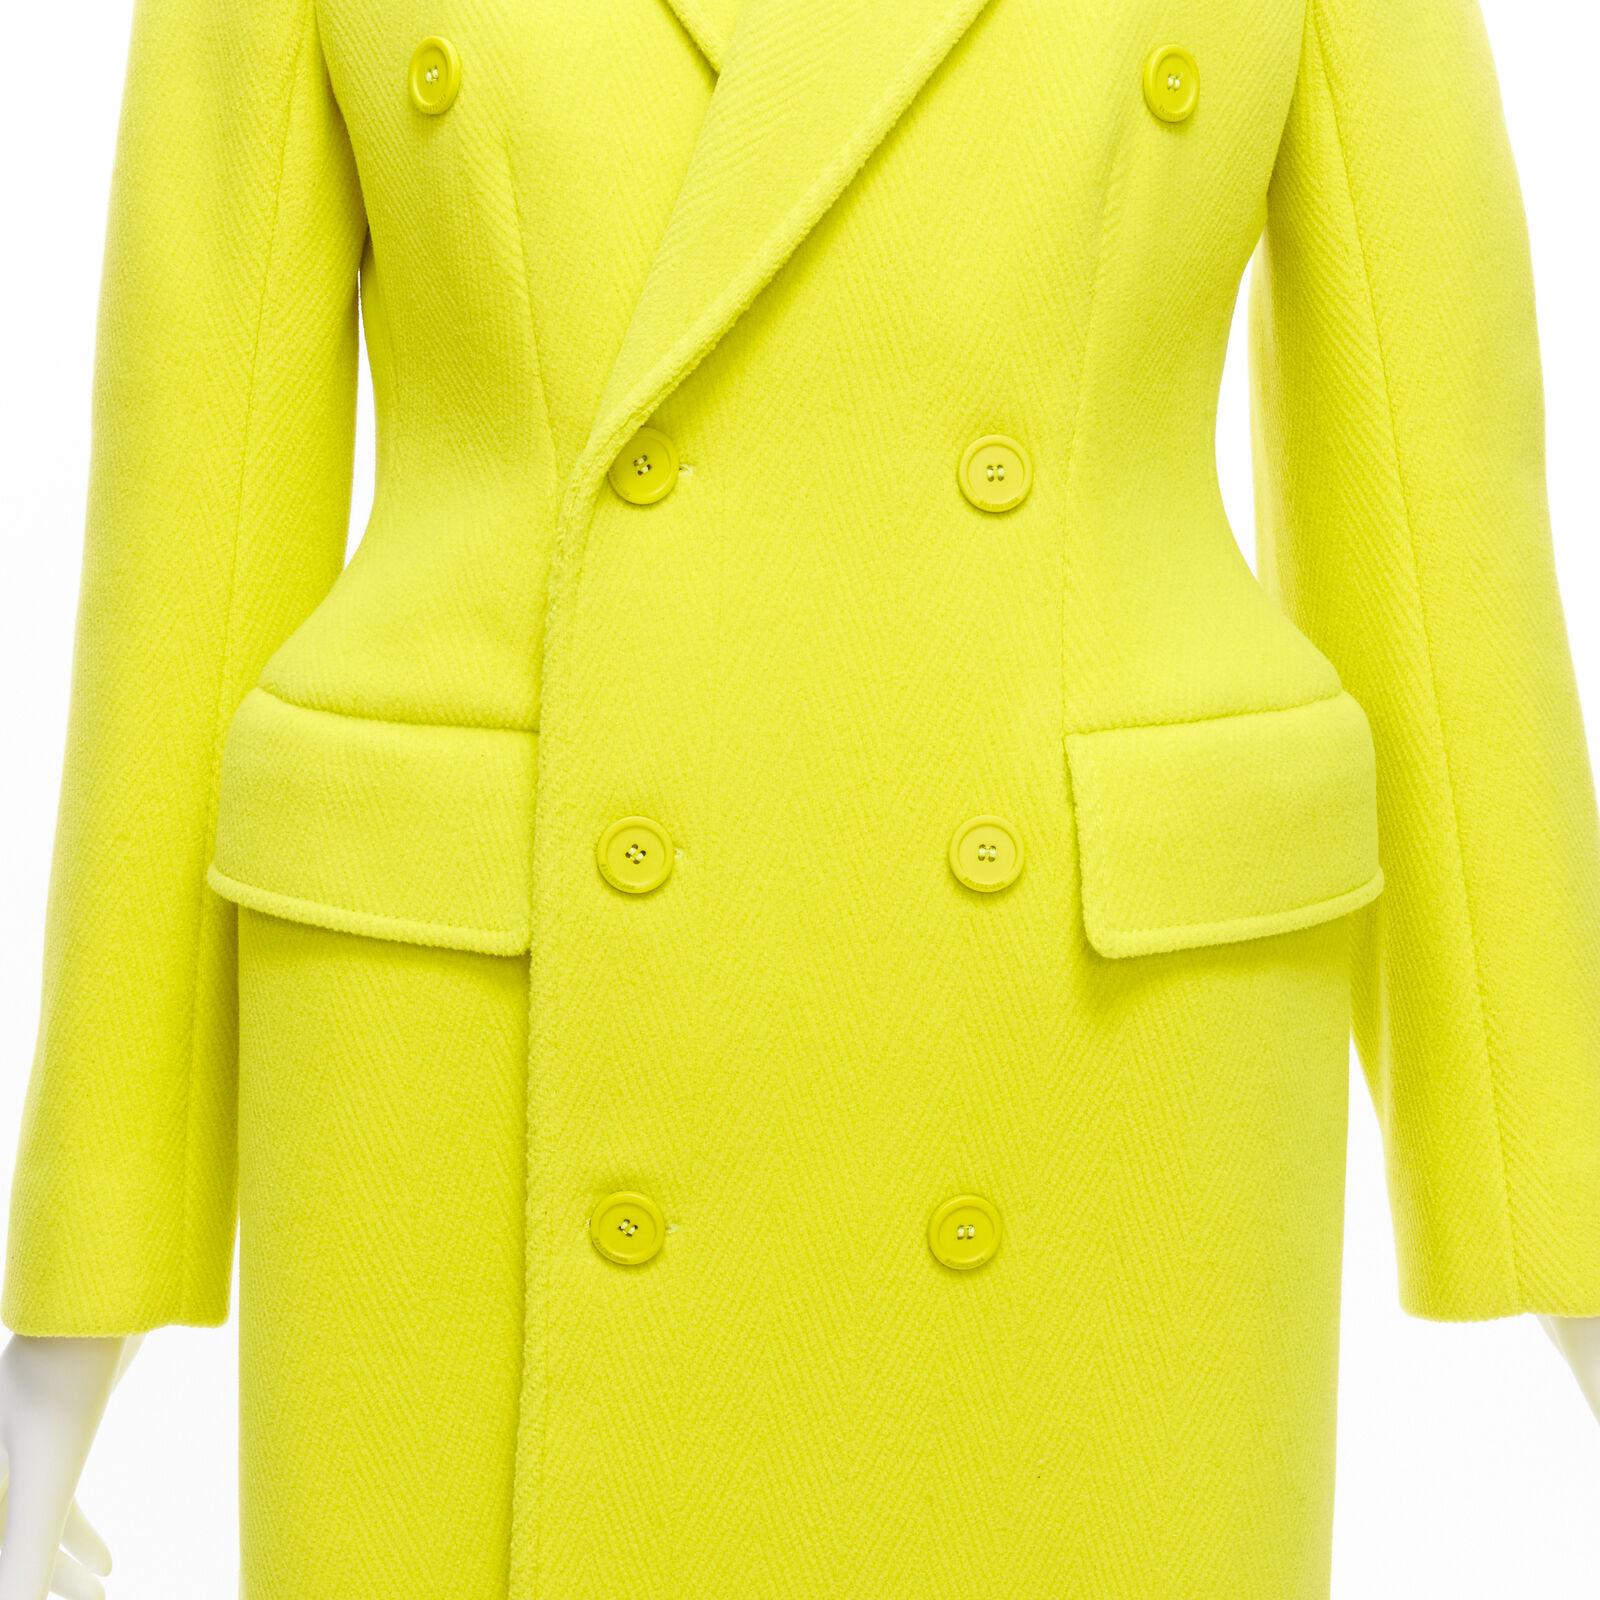 new BALENCIAGA Hourglass bright yellow wool double breasted peplum coat FR36 S For Sale 2